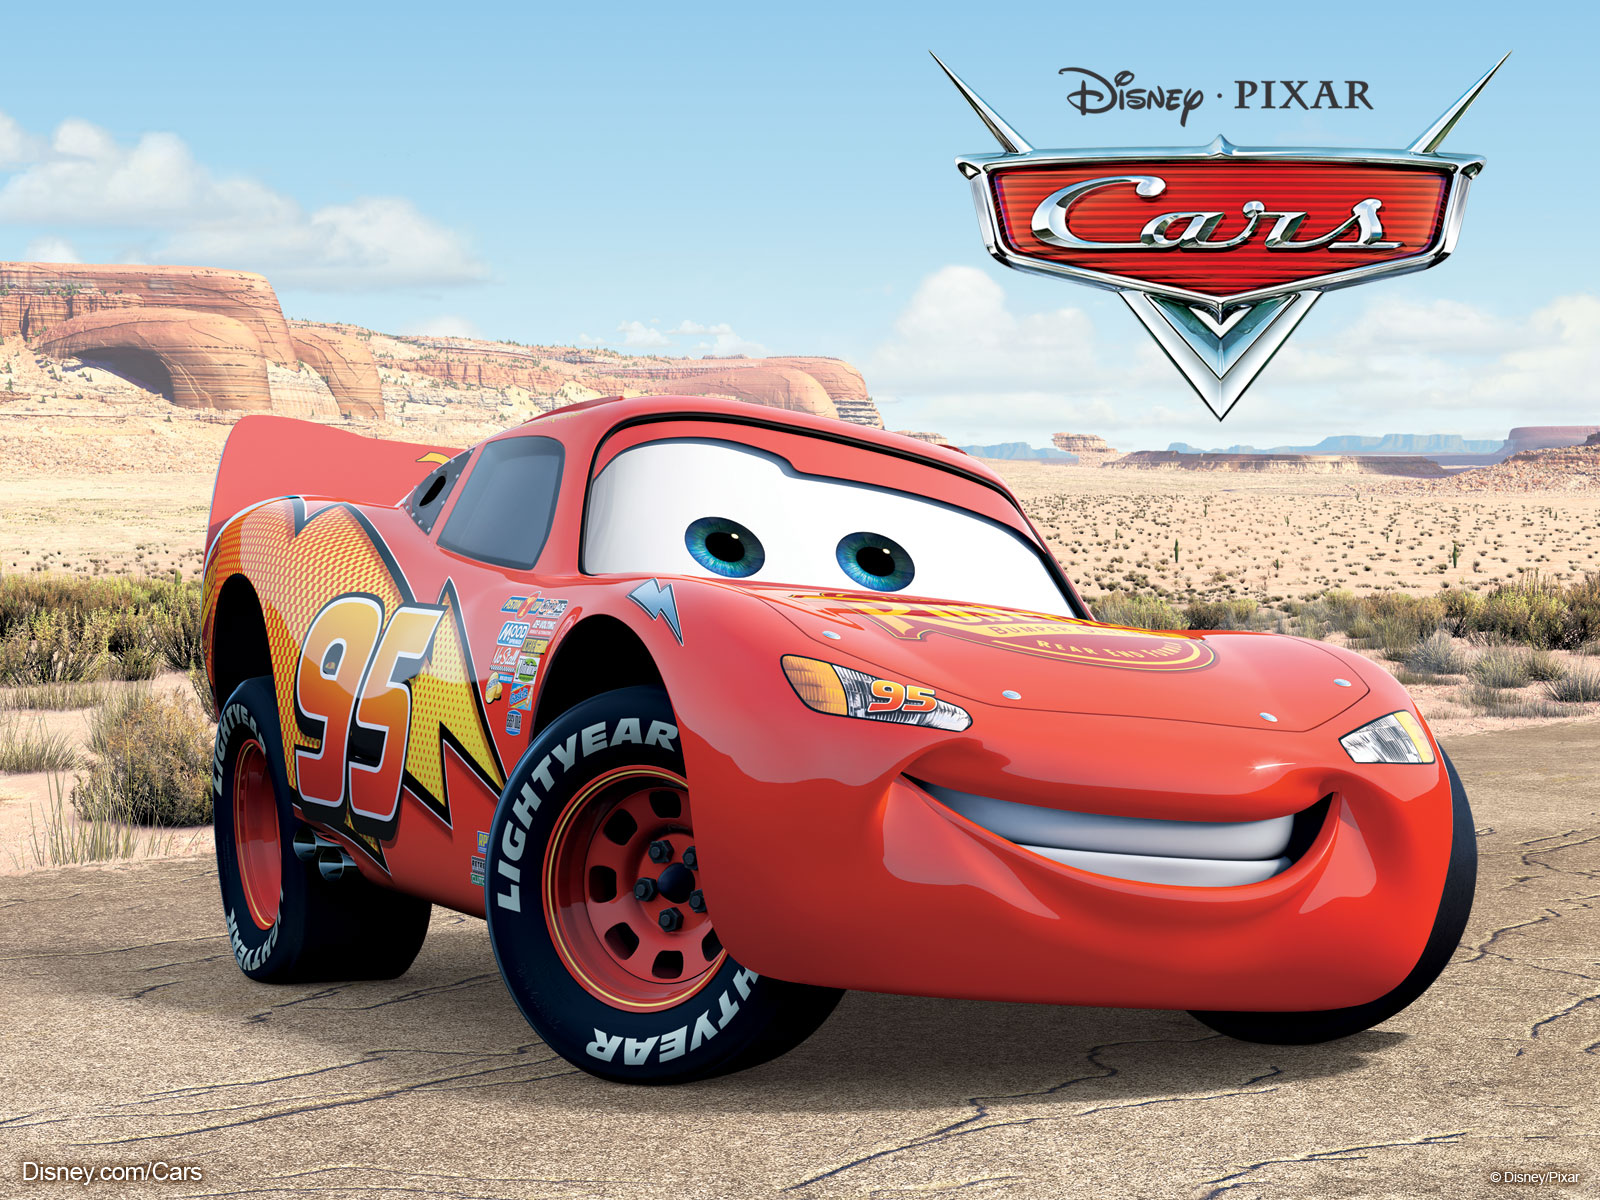 Free download McQueen the red race car from the DisneyPixar move Cars wallpaper [1600x1200] for your Desktop, Mobile & Tablet. Explore Disney Cars Movie Wallpaper. Disney Character Wallpaper, Disney